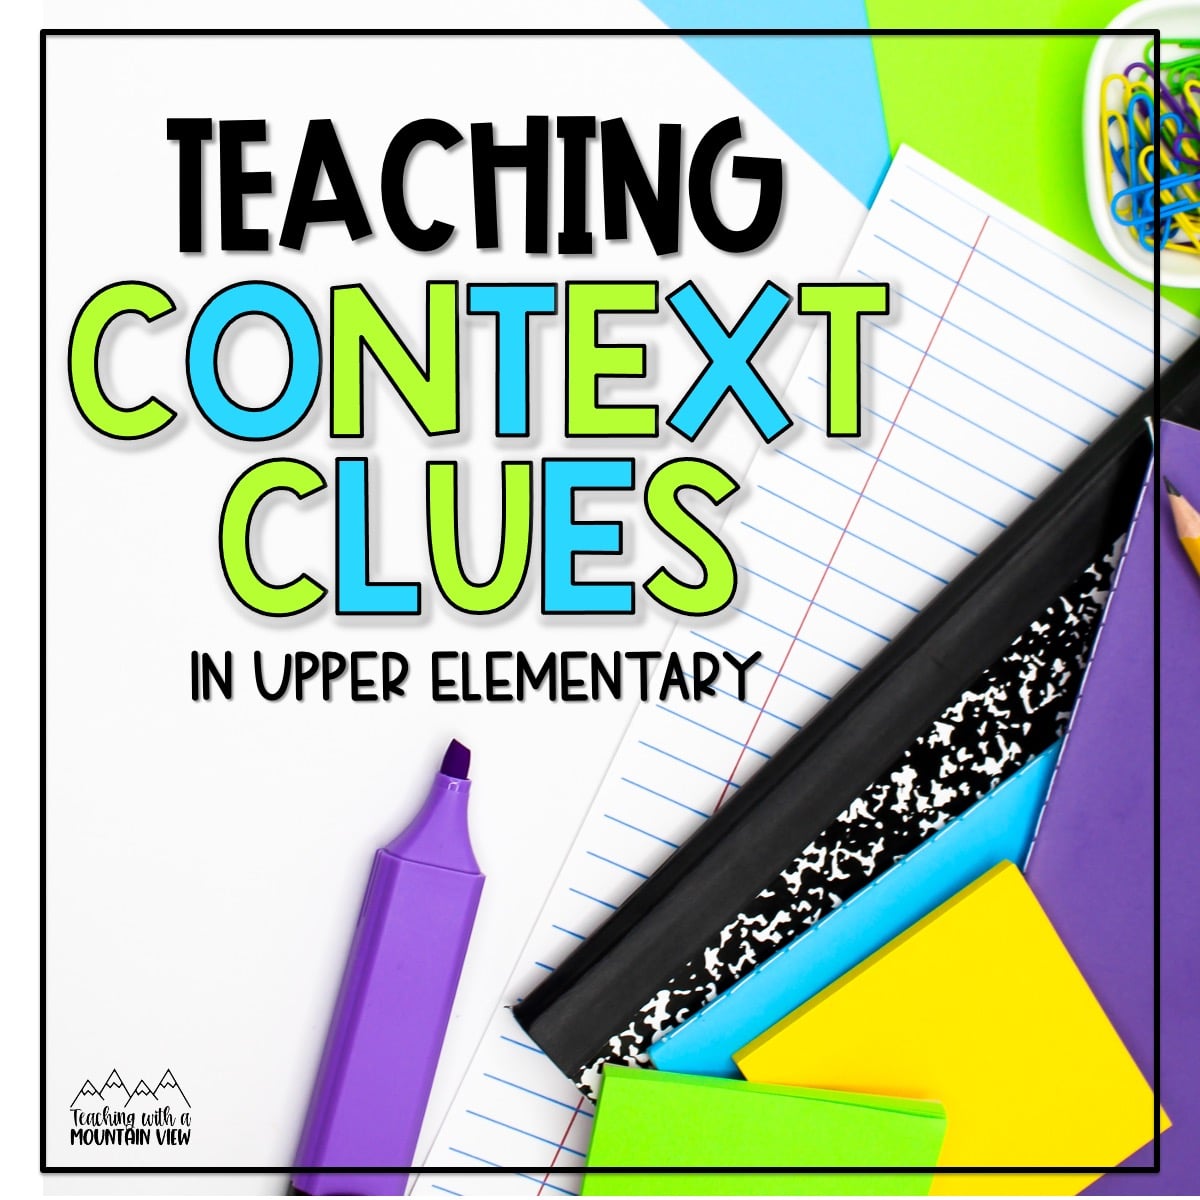 Upper elementary anchor charts, reference books, practice activities, projects, and task cards for teaching context clues.